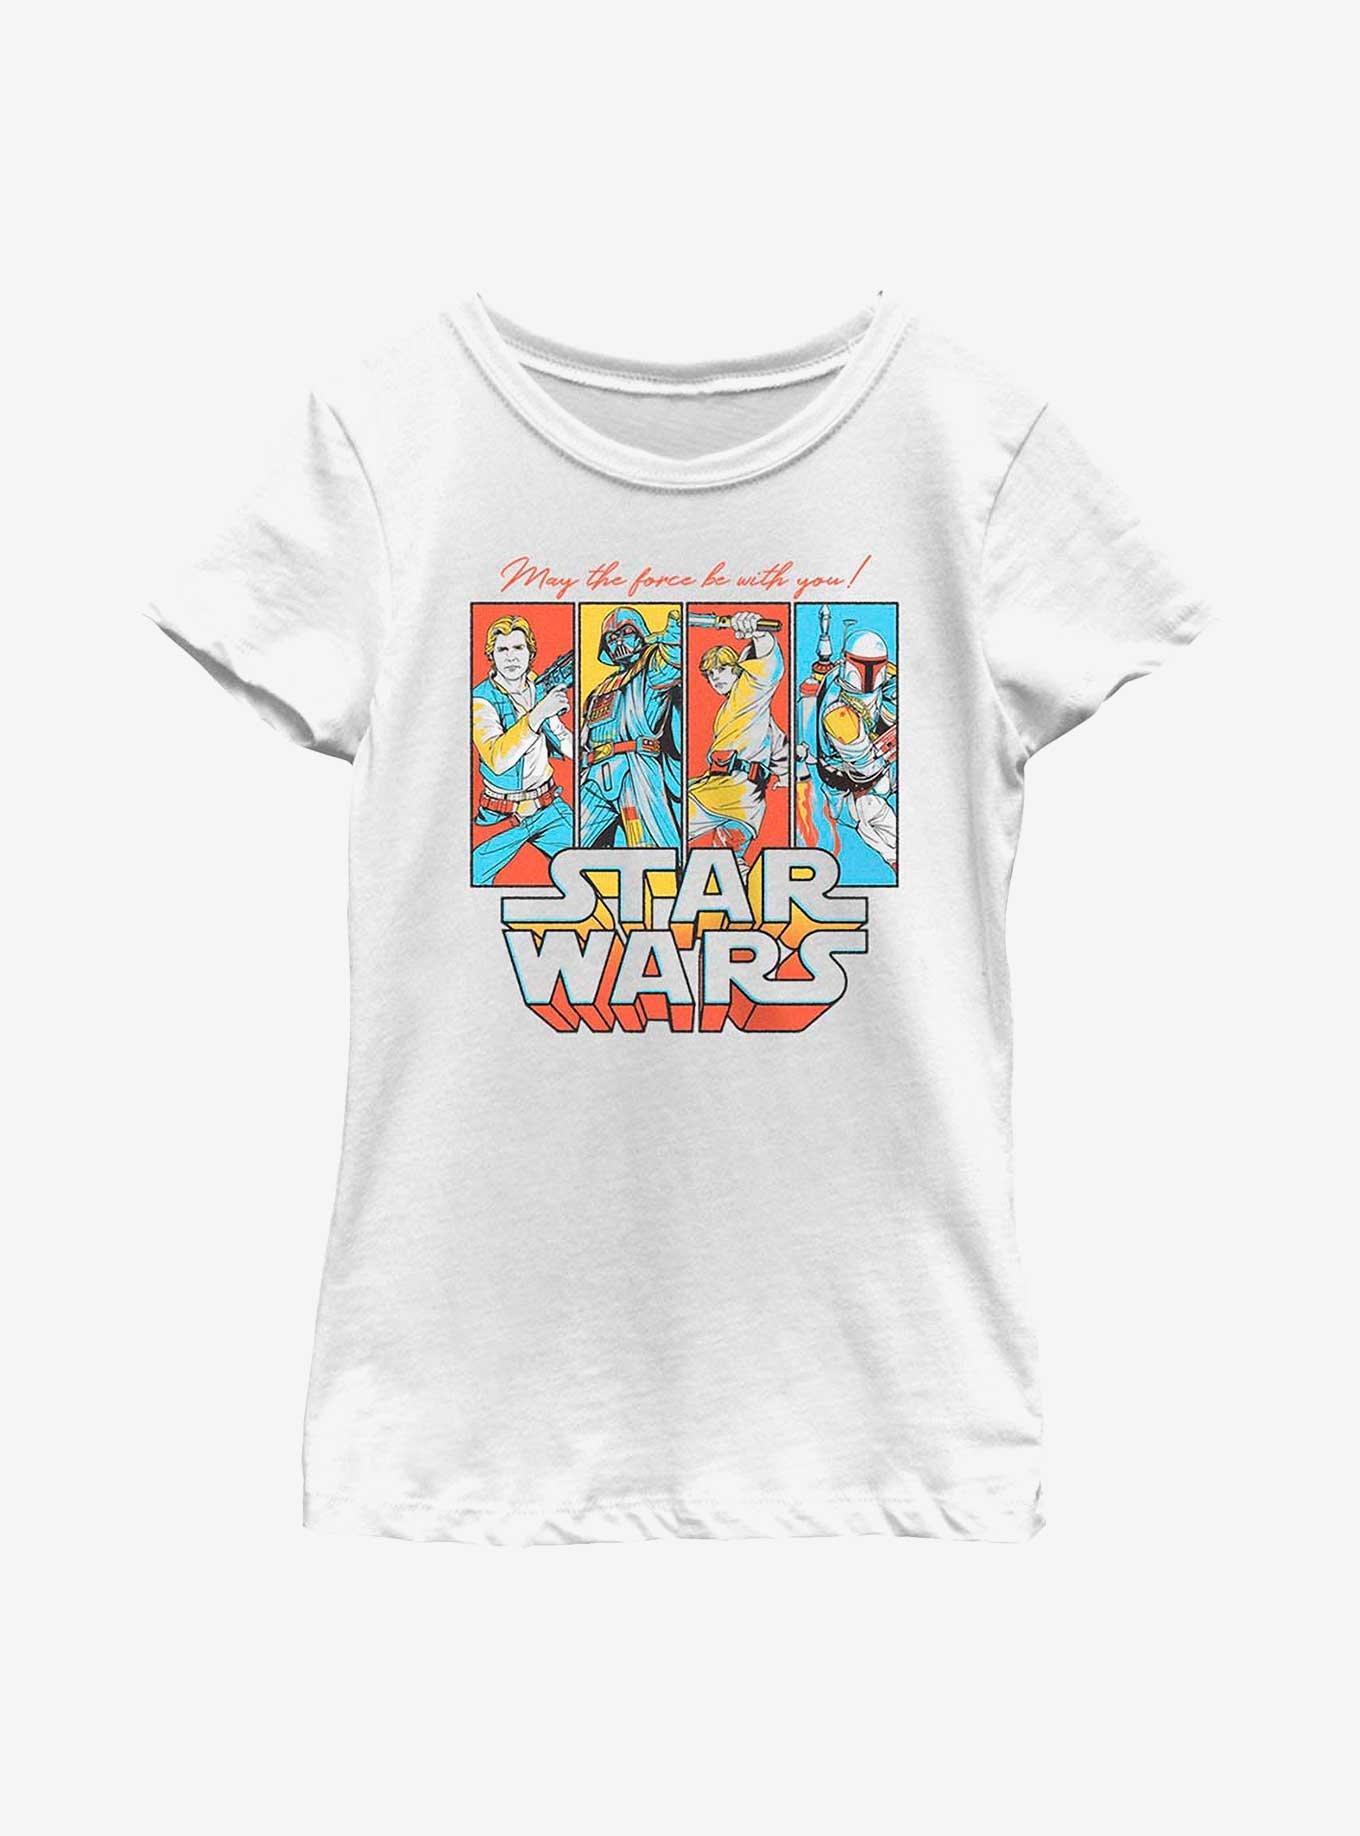 Star Wars Pop Culture Crew Youth Girls T-Shirt, WHITE, hi-res